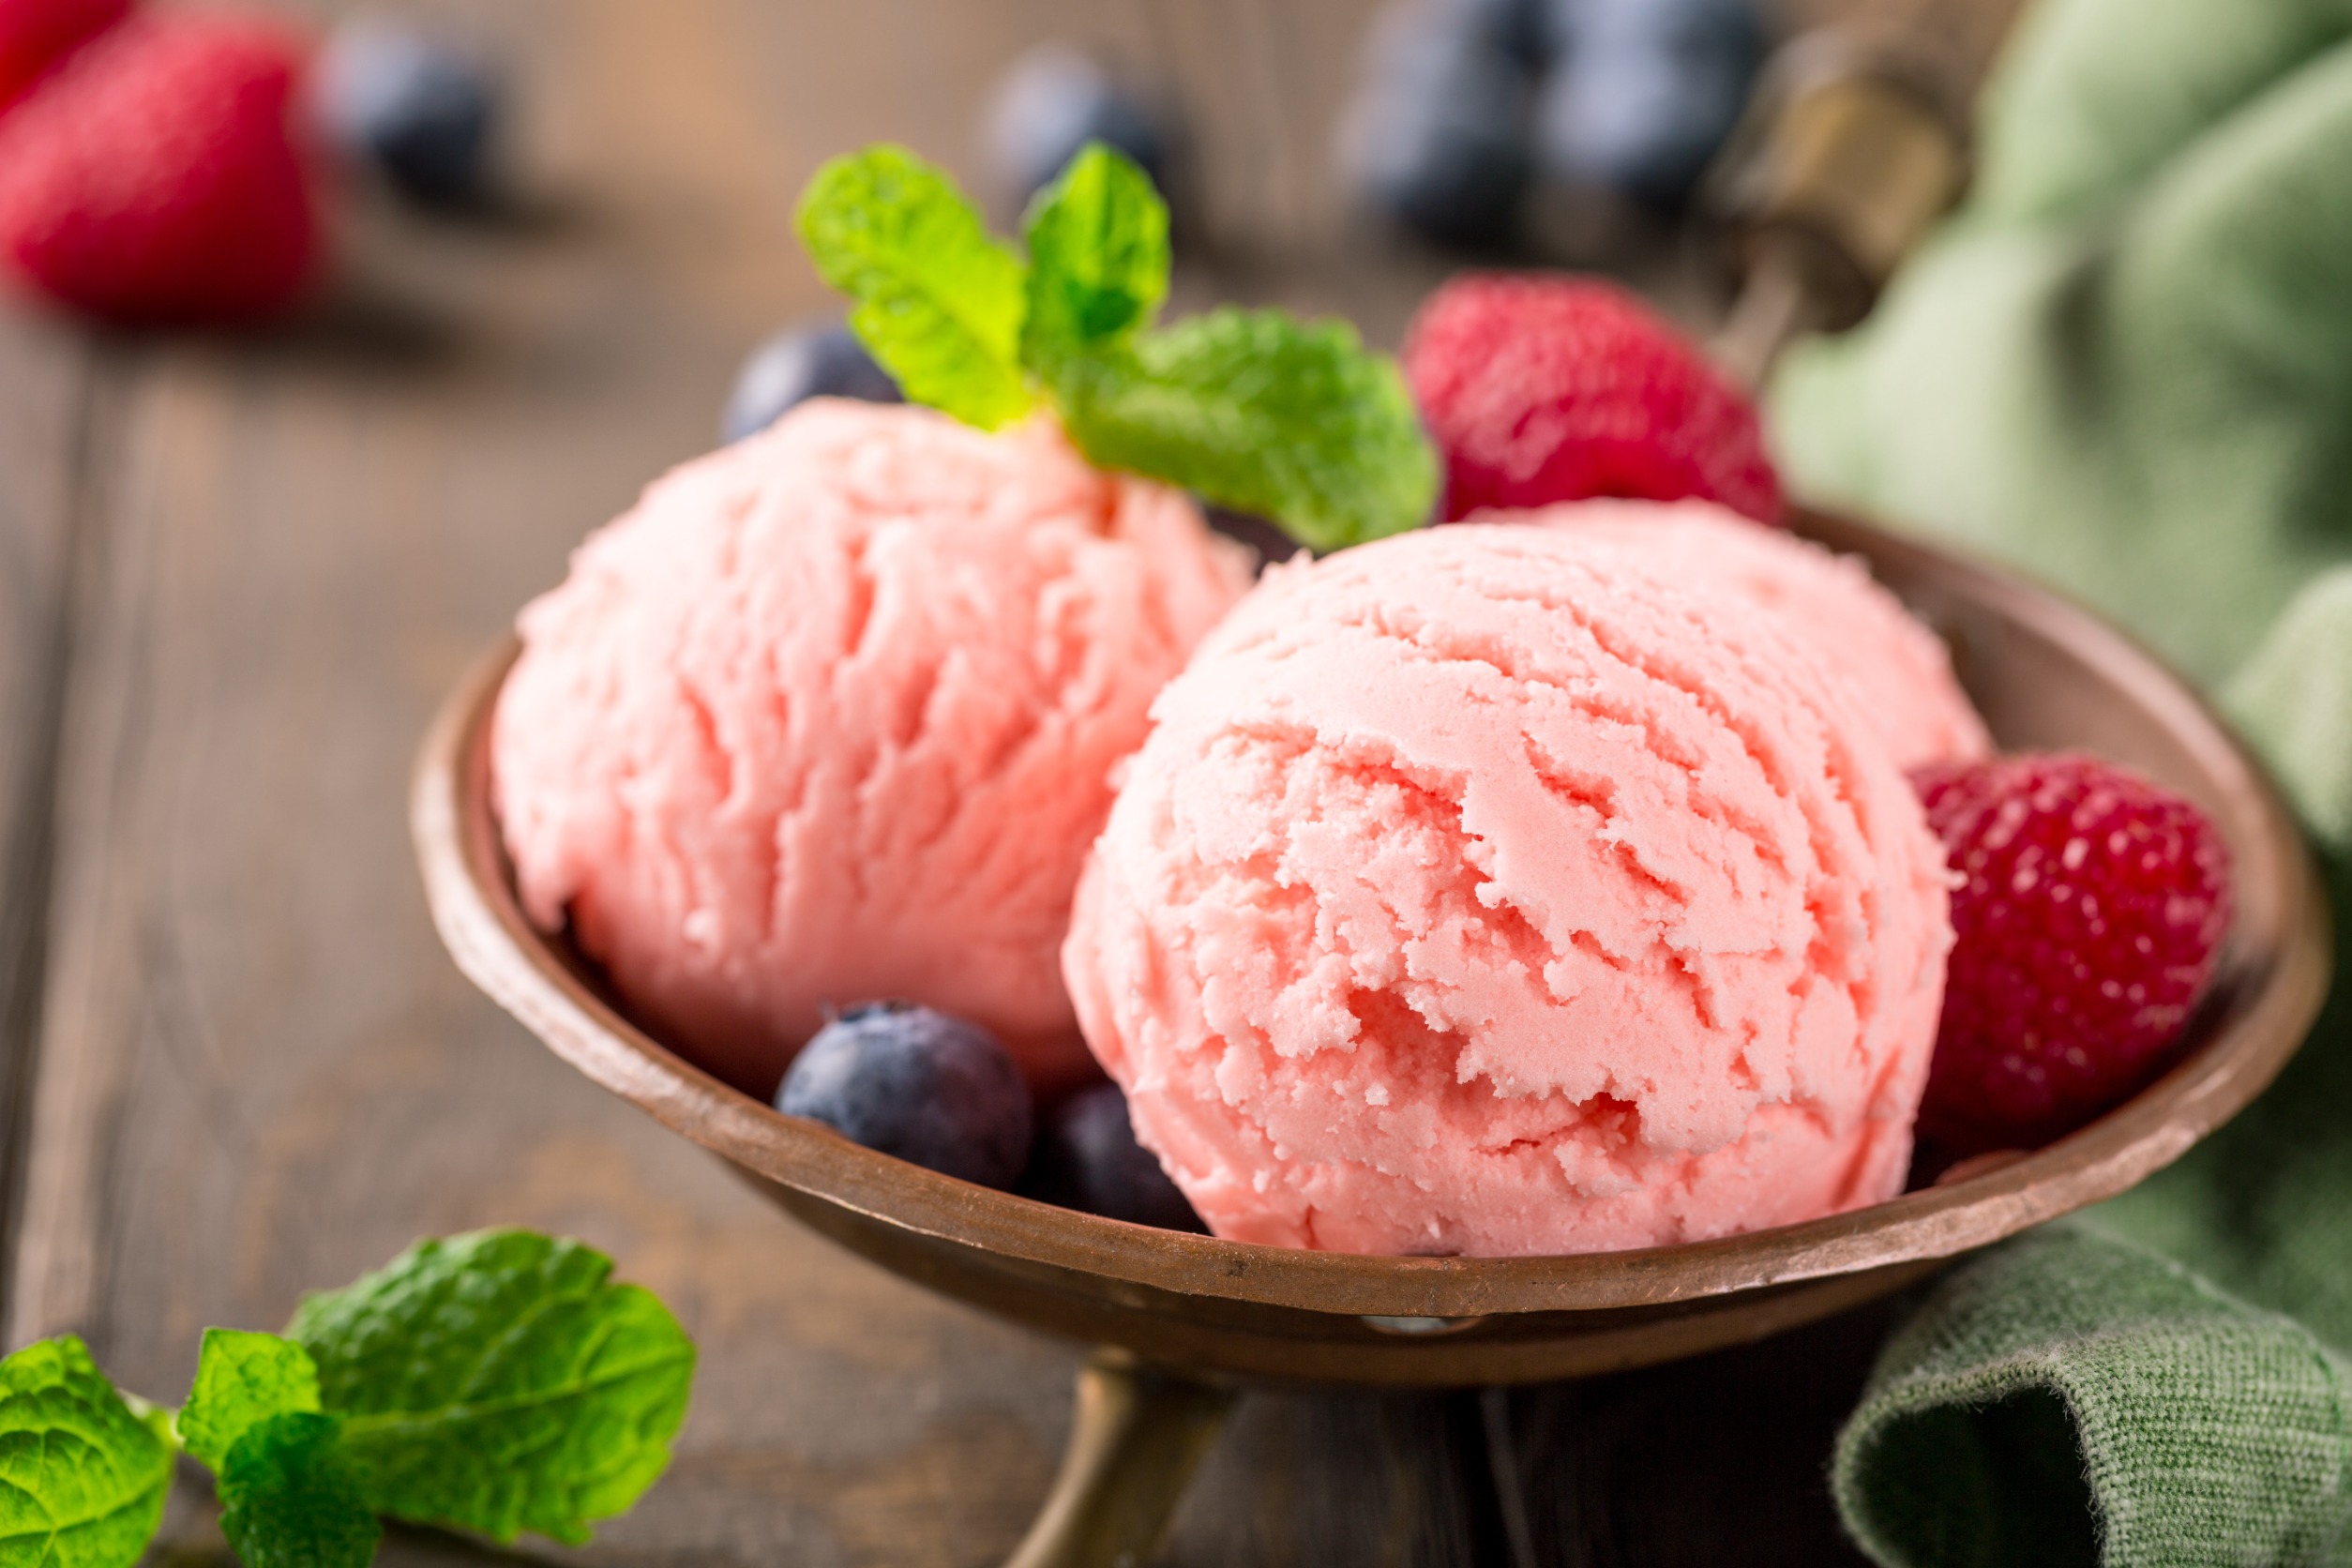 Reduced-calorie sorbet from a frozen food ingredient supplier